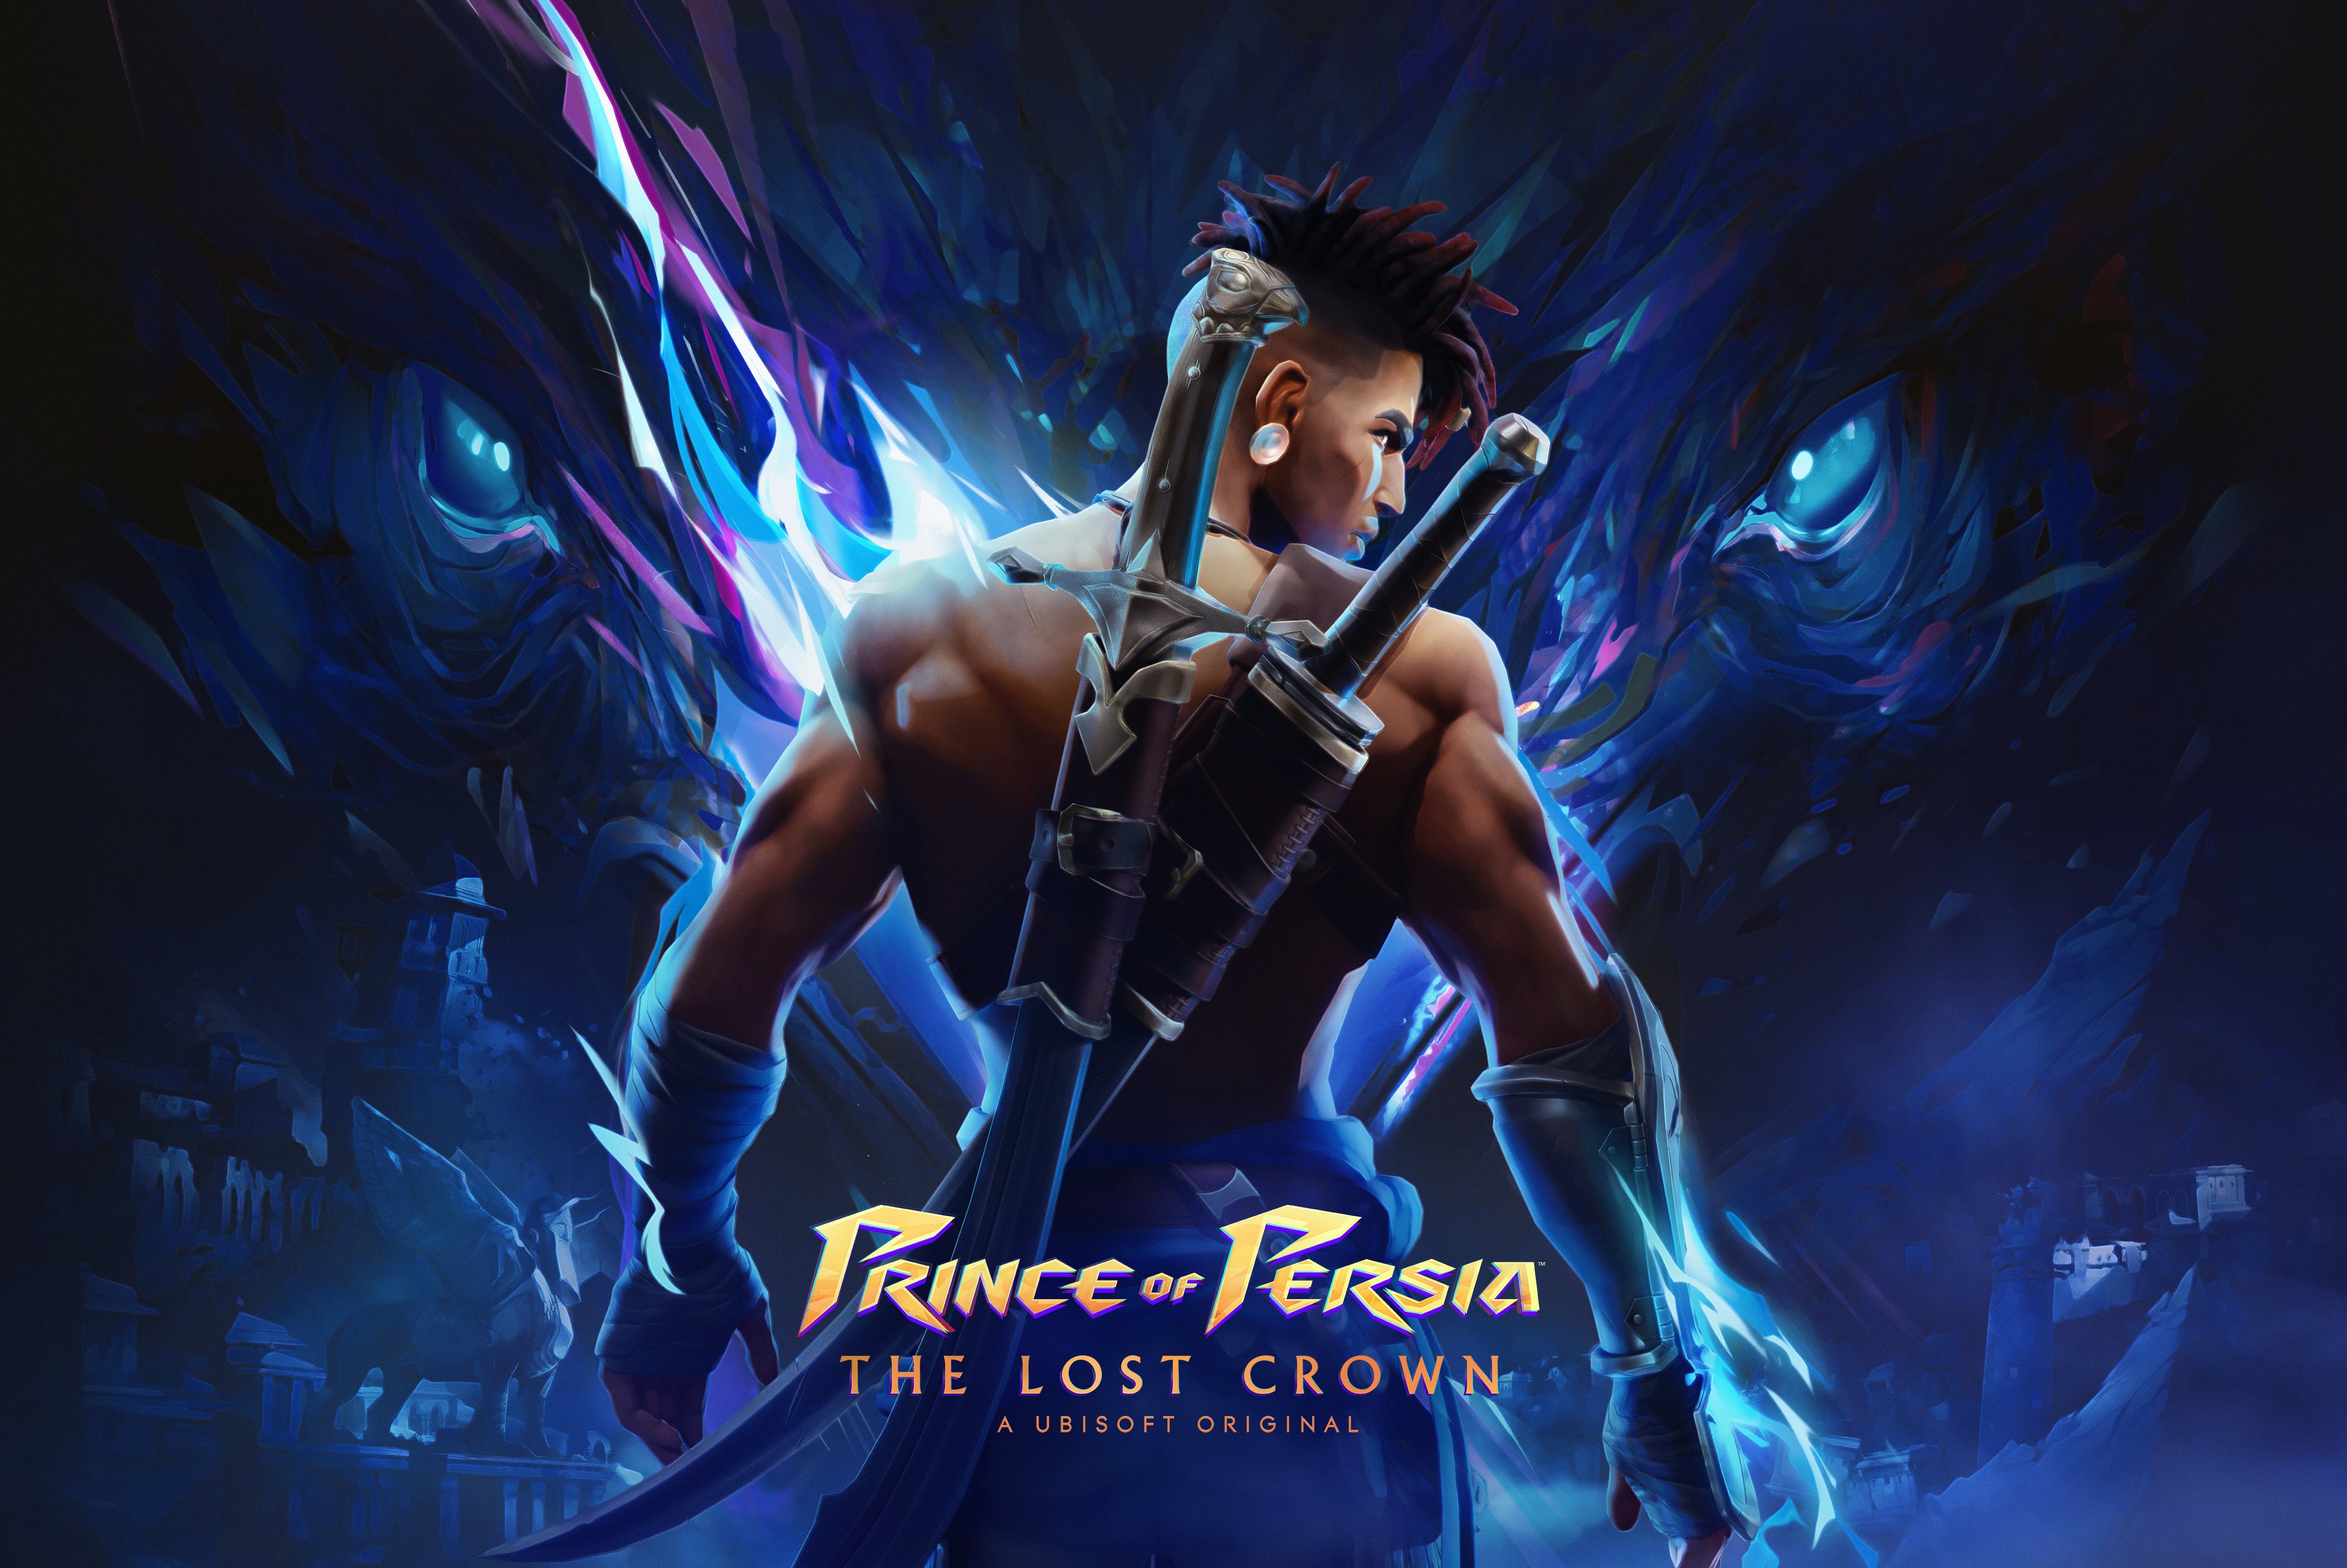 Ubisoft_UK on X: 🎁 GIVEAWAY TIME! 🎁 Prince of Persia: The Lost Crown  releases on Thursday & we are giving away 1 Deluxe Edition on PS5, Xbox  Series X